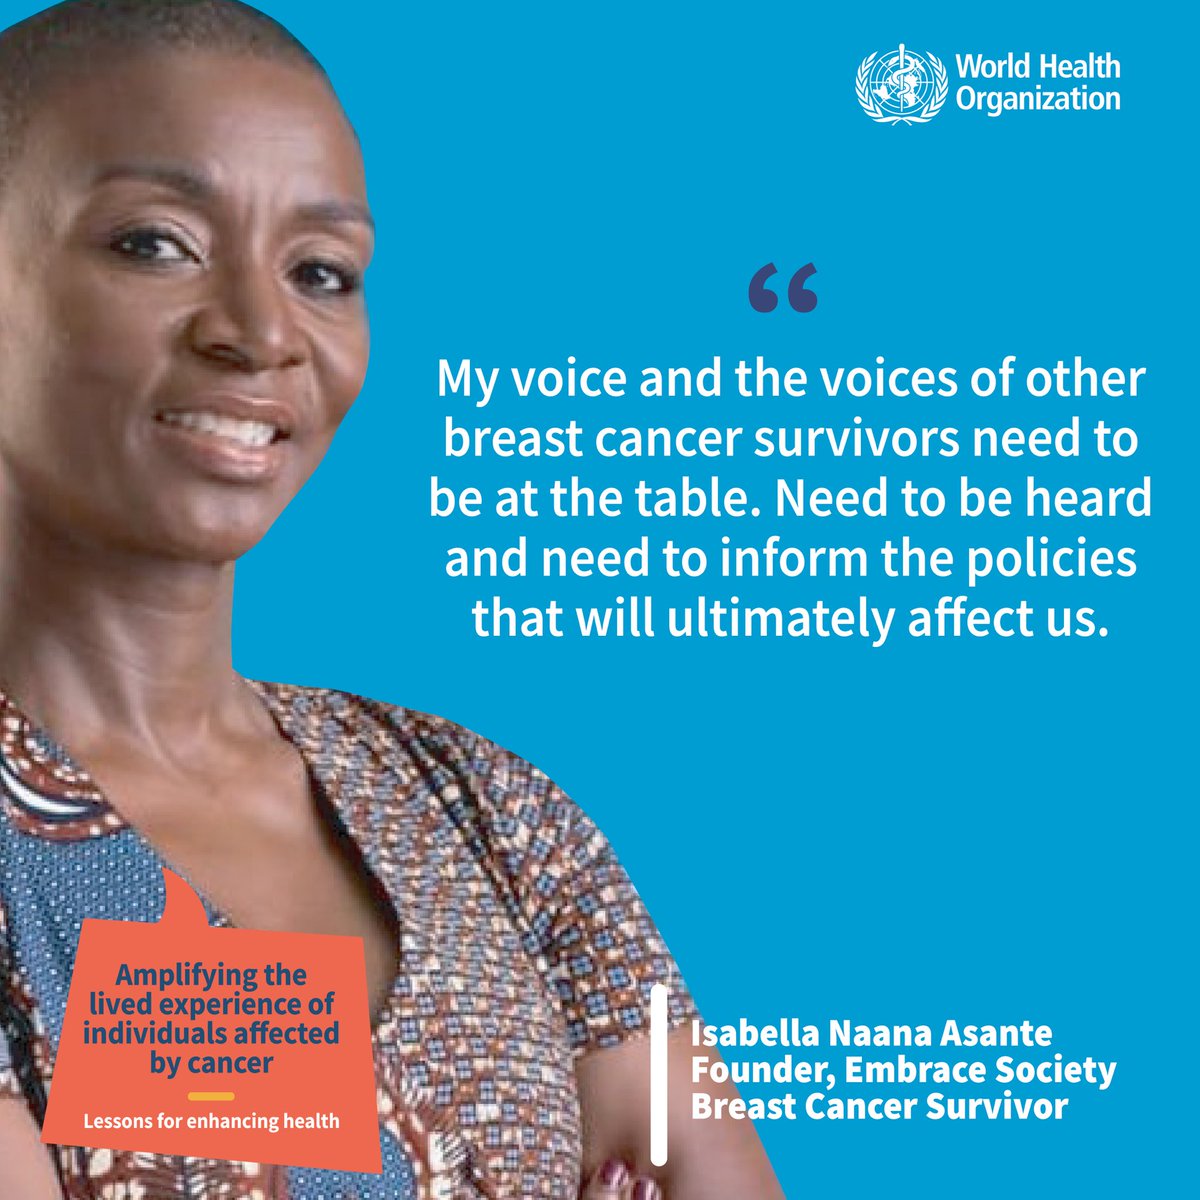 Understanding and amplifying the #LivedExperience of people affected by #cancer ✅ need to be at the table ✅ need to be heard ✅ need to inform policies that will ultimately affect them Join @WHO’s initiative launch today! #WCC2020 @uicc #WorldCancerCongress2022